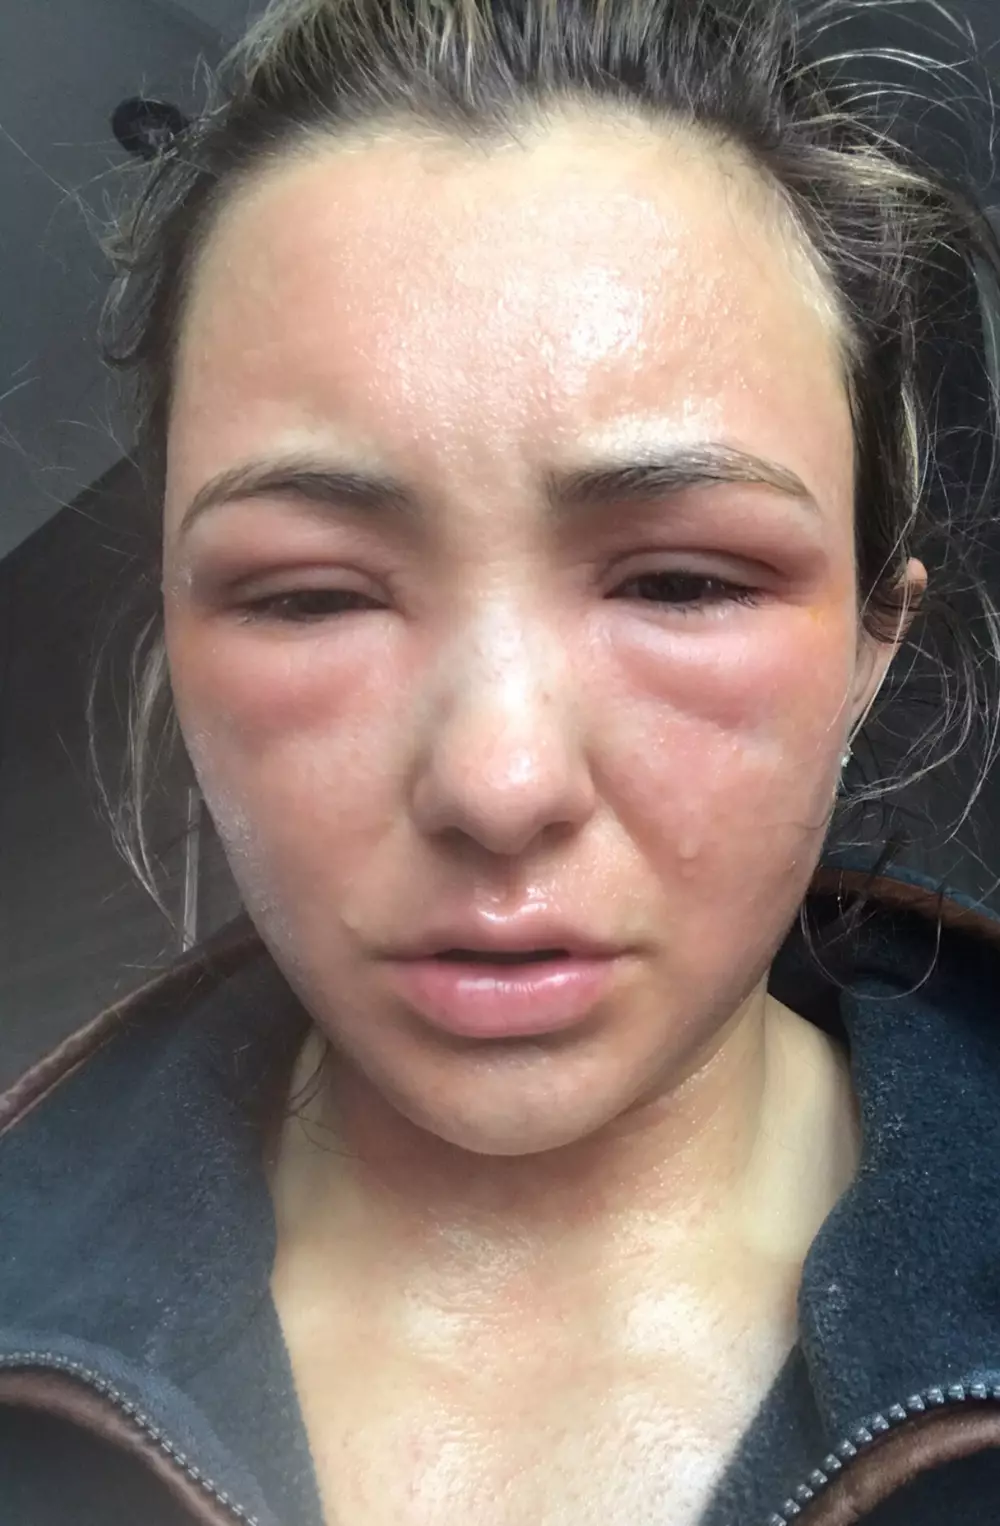 Eden's skin was so sore and swollen that she was mistaken for a victim of domestic abuse (